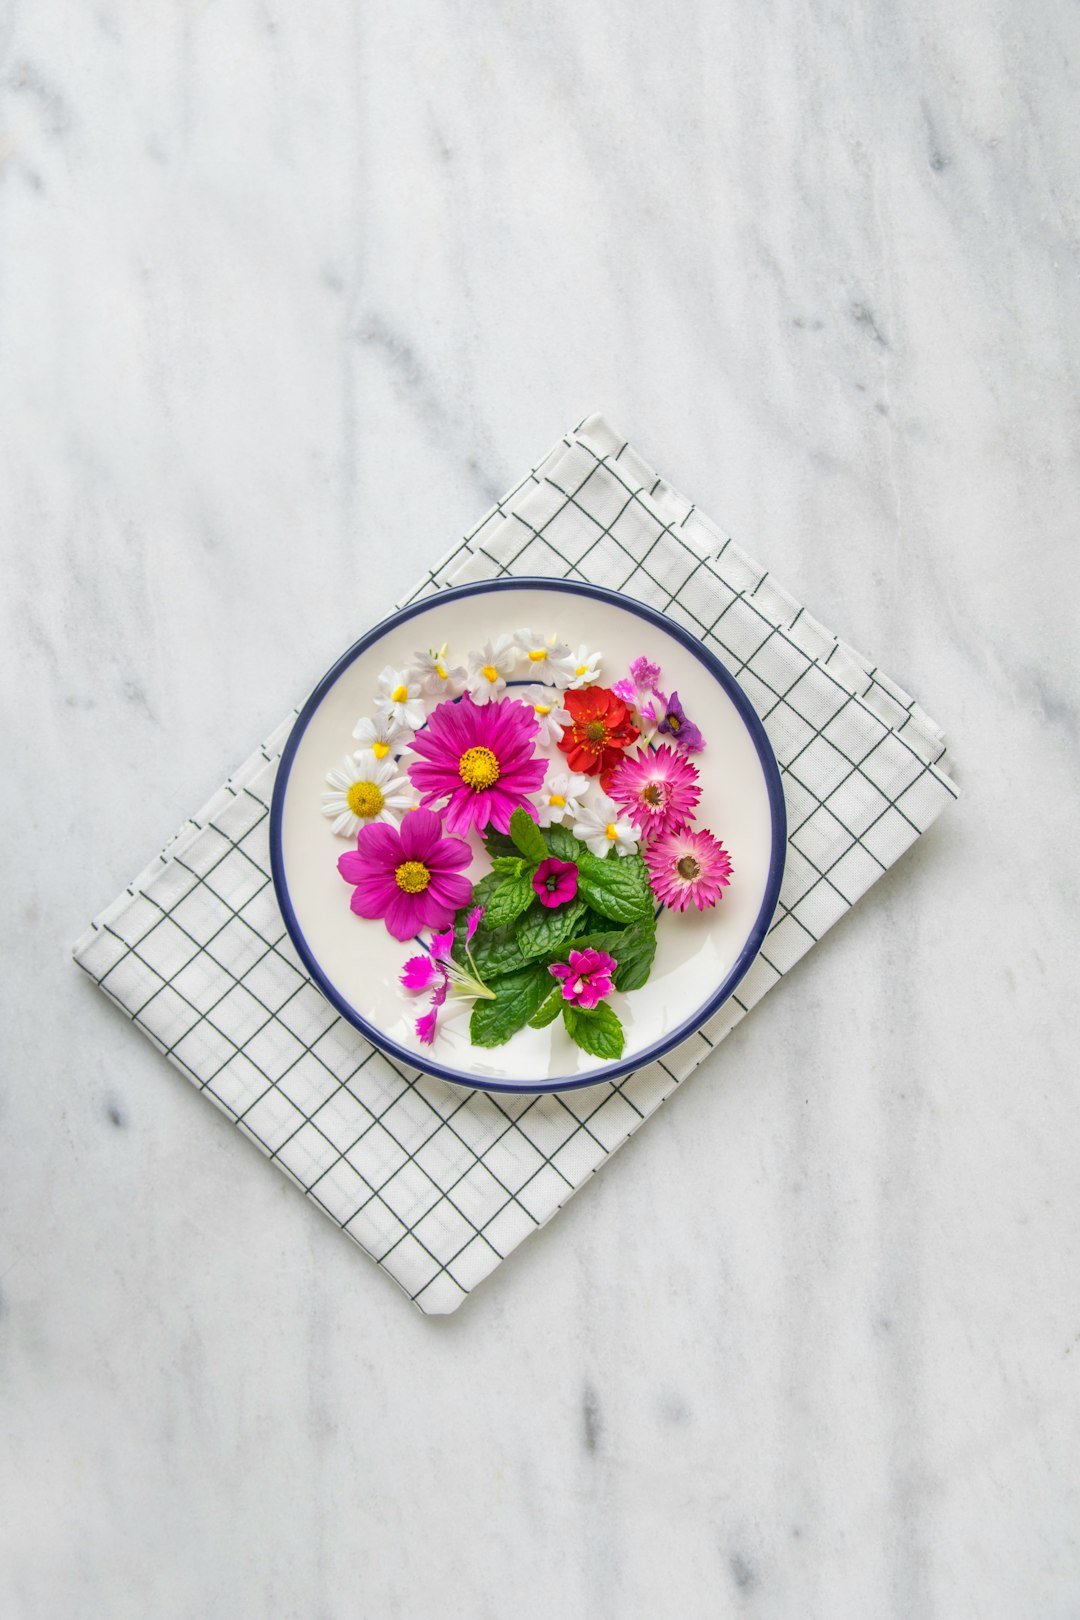  pink petaled flower on white plate tablecloth